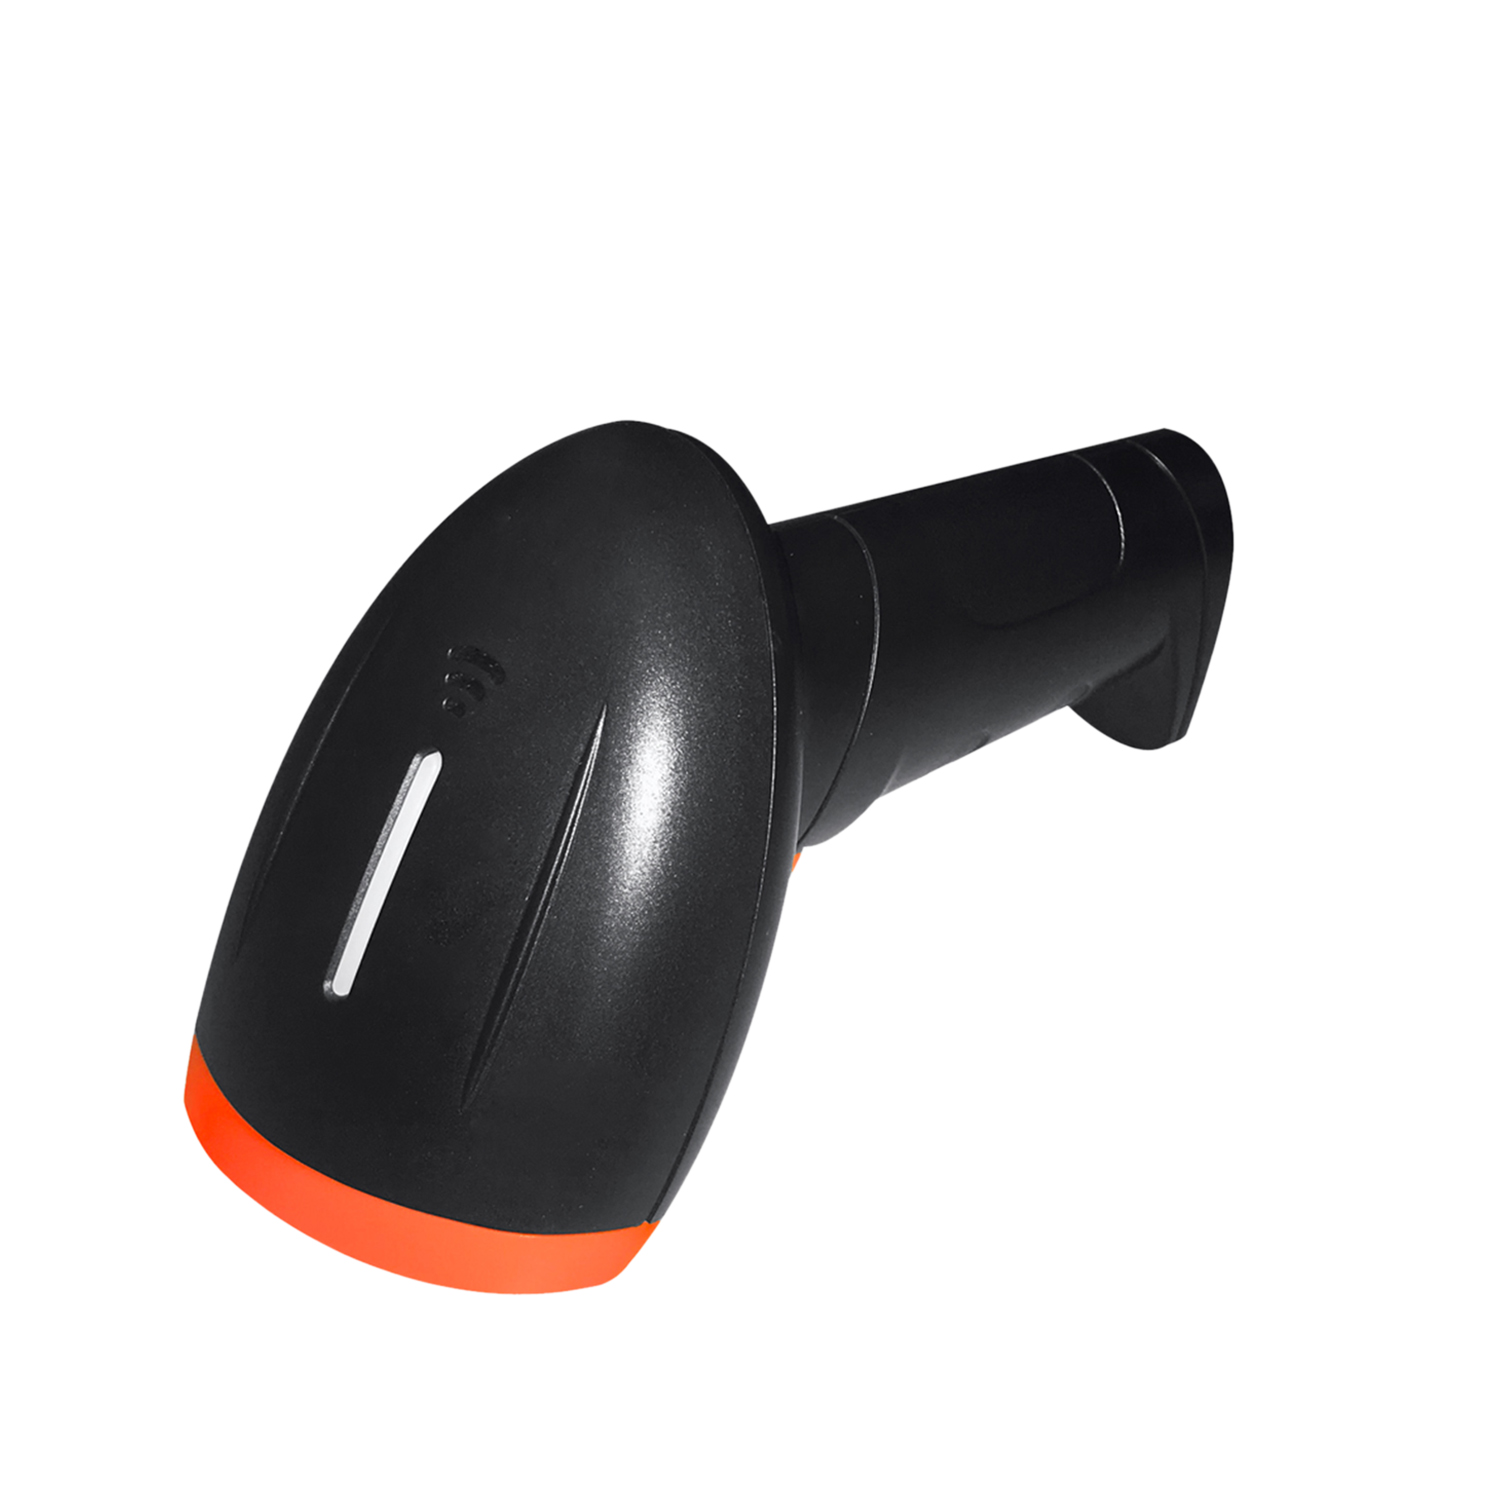 Best Industrial Wired Handheld 1D&2D Barcode Scanner for Business HS-6603B